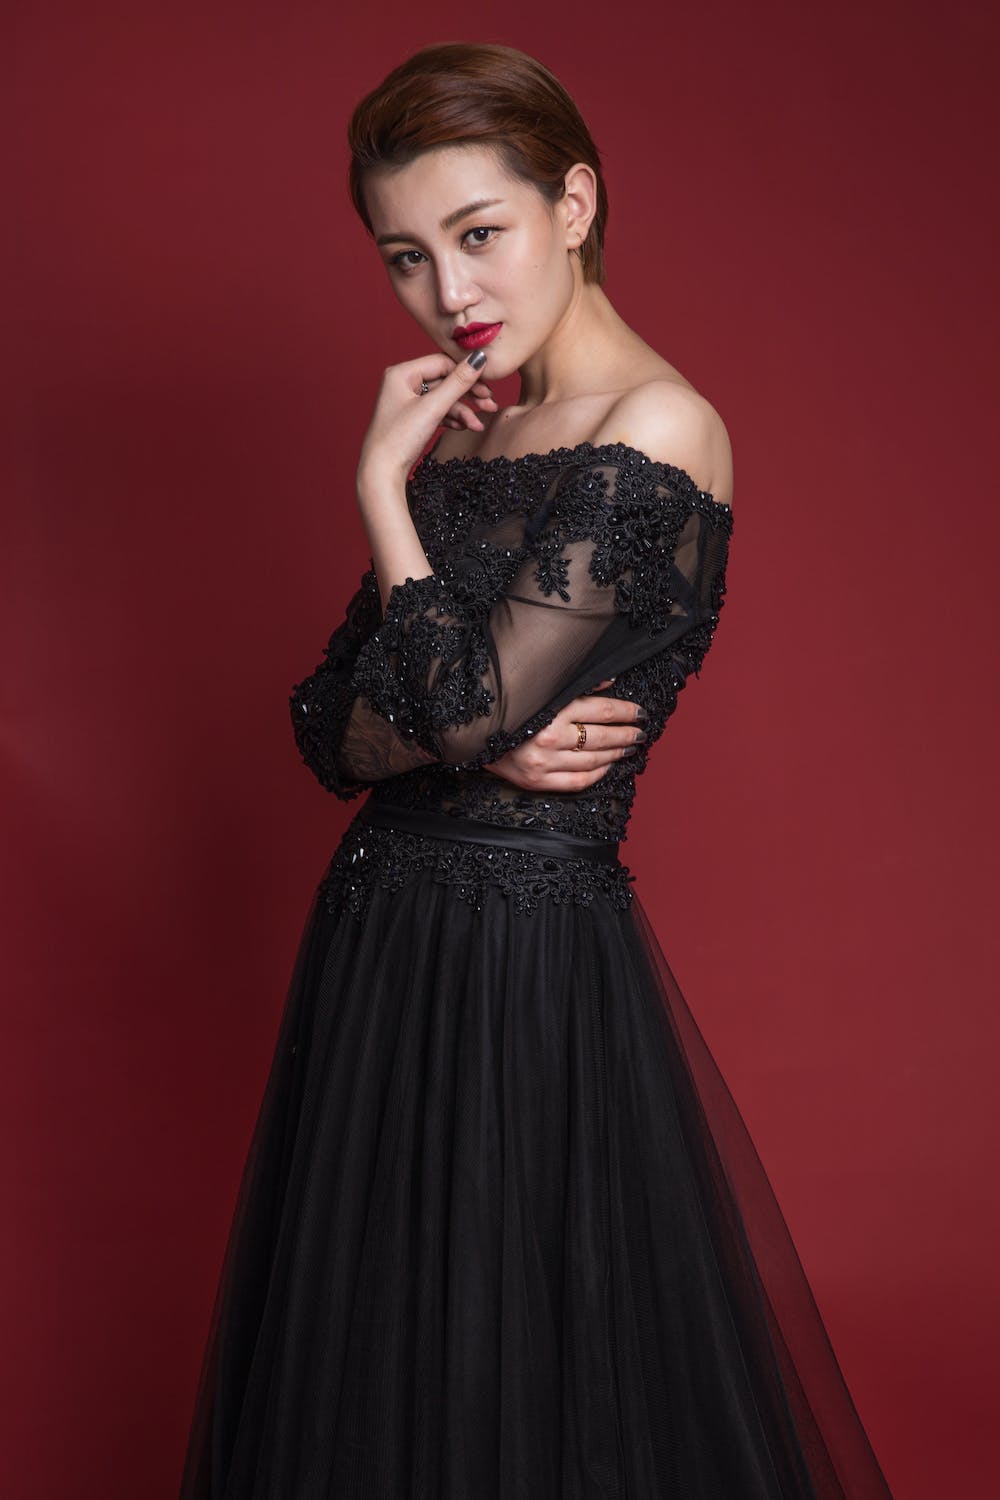 Roaring 20s party outfits black dress